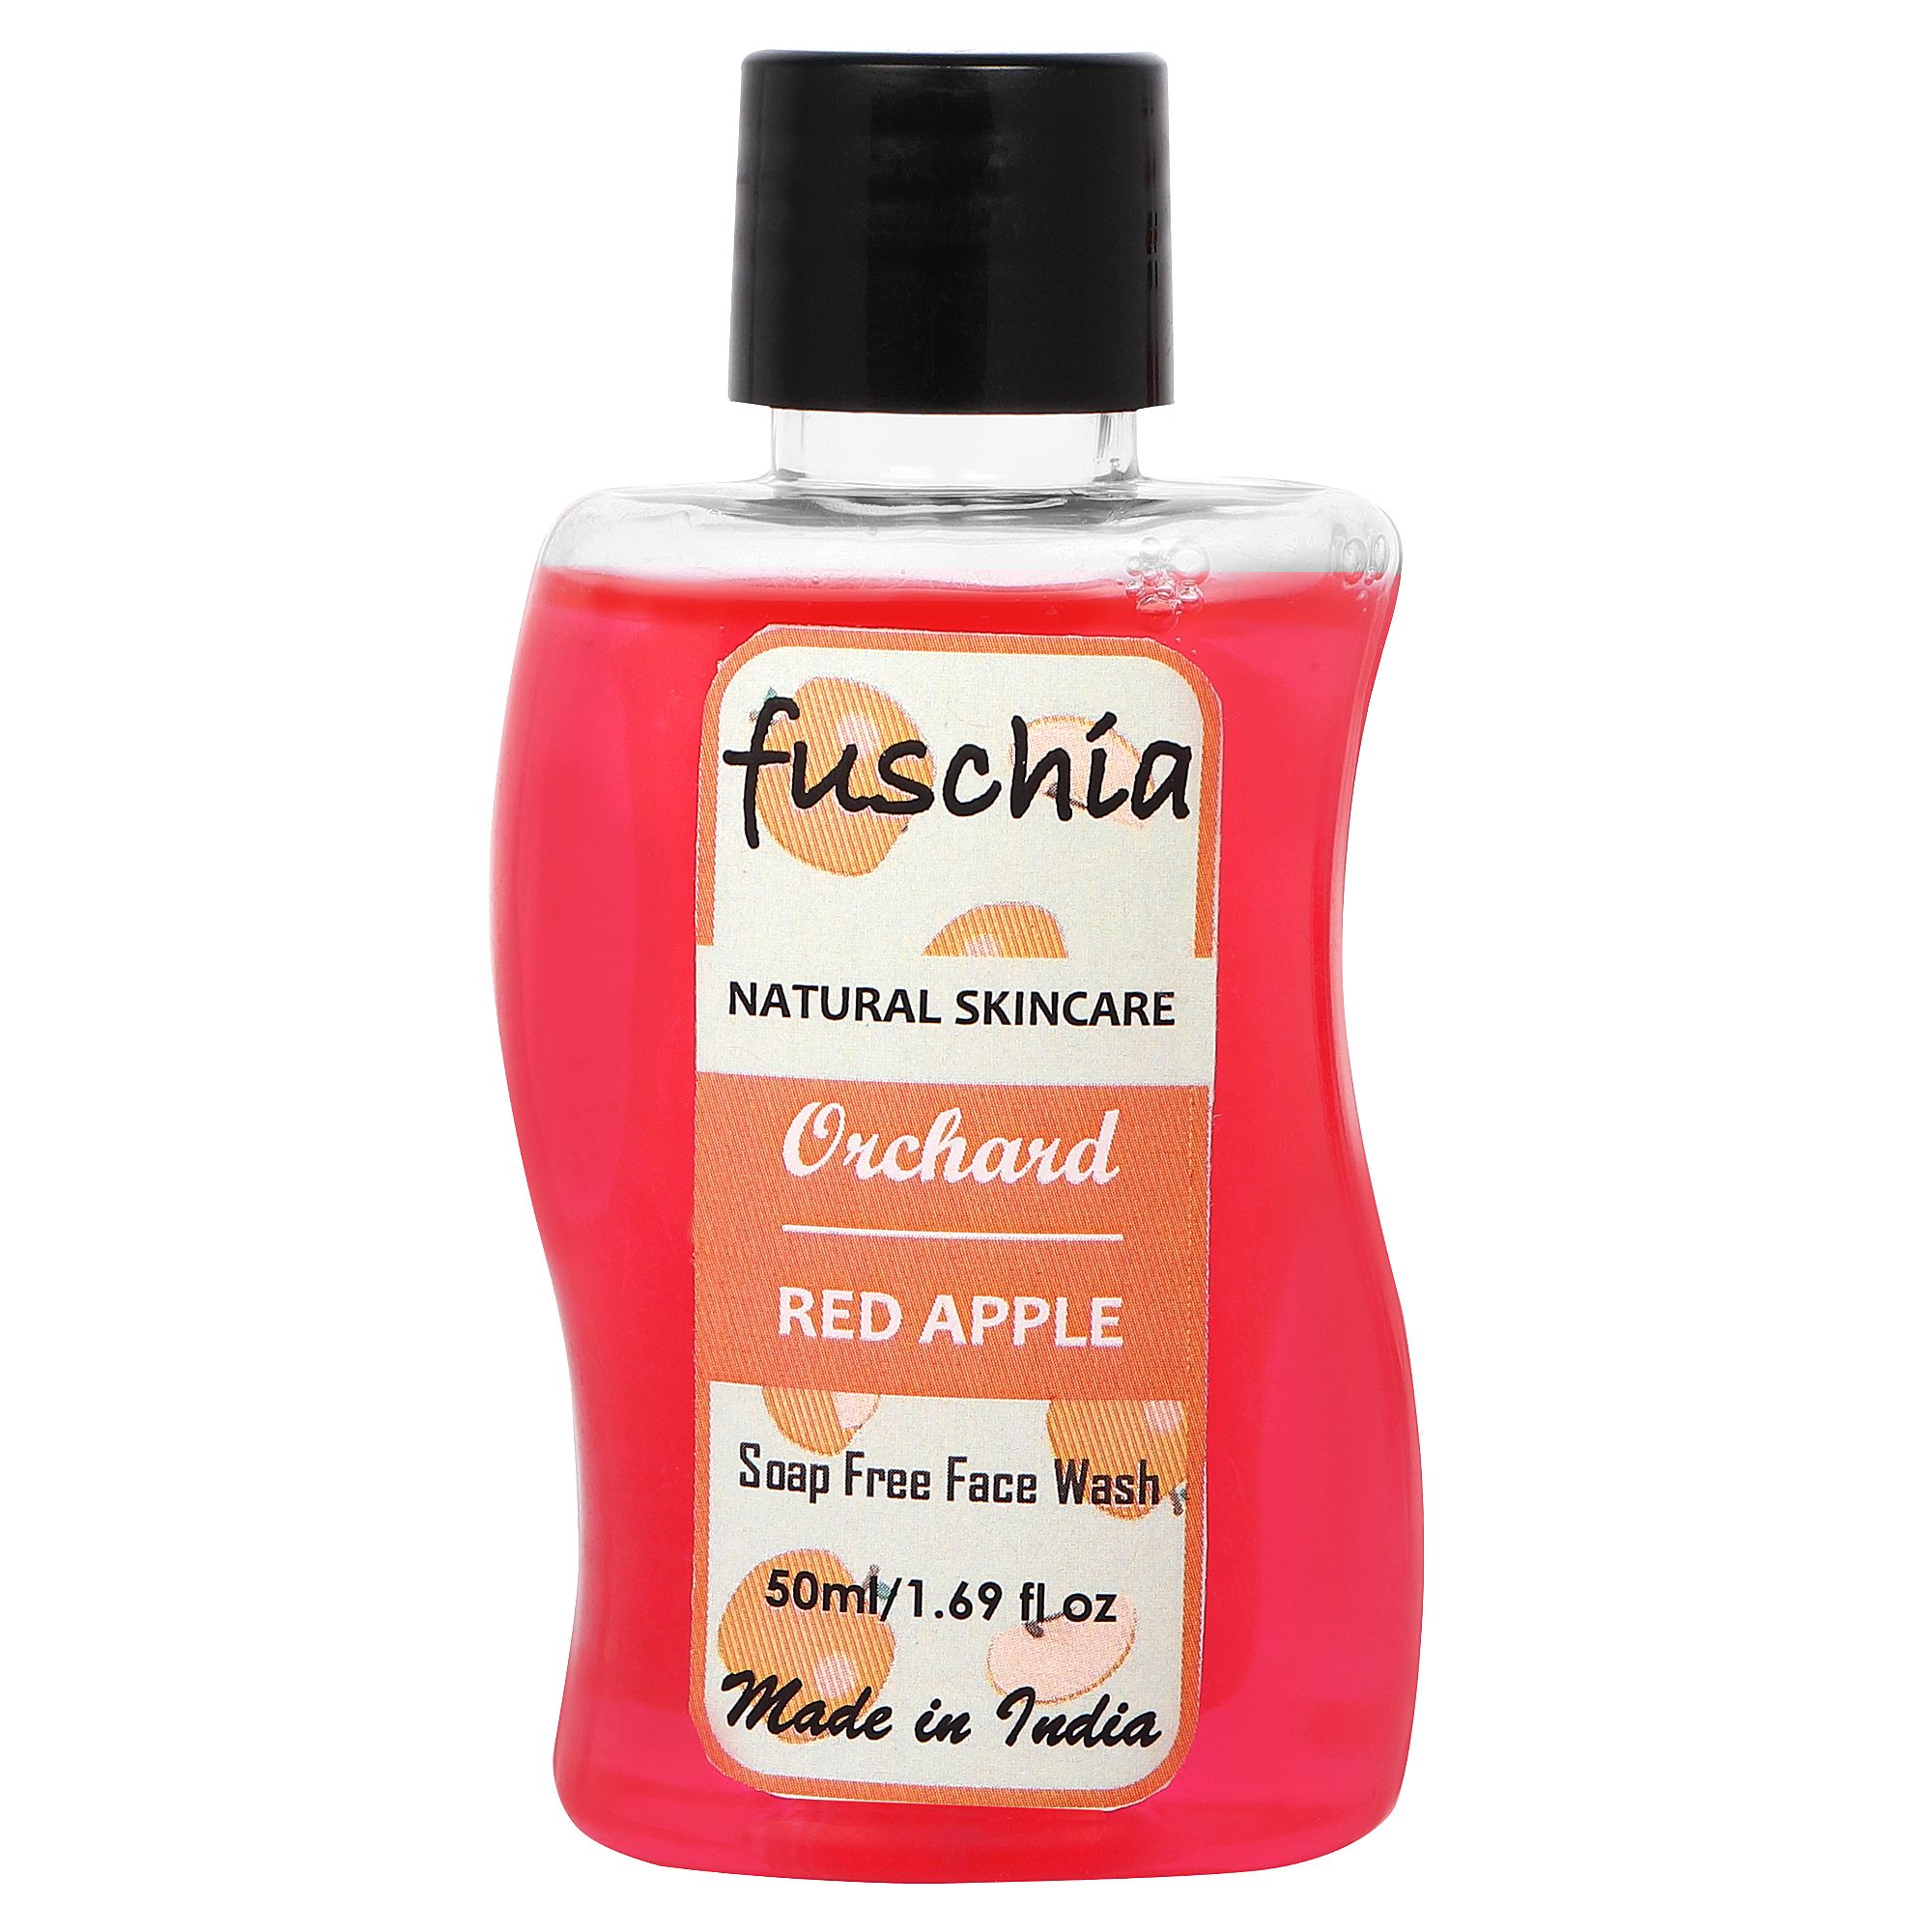 fuschia-orchard-red-apple-soap-free-face-wash-50ml